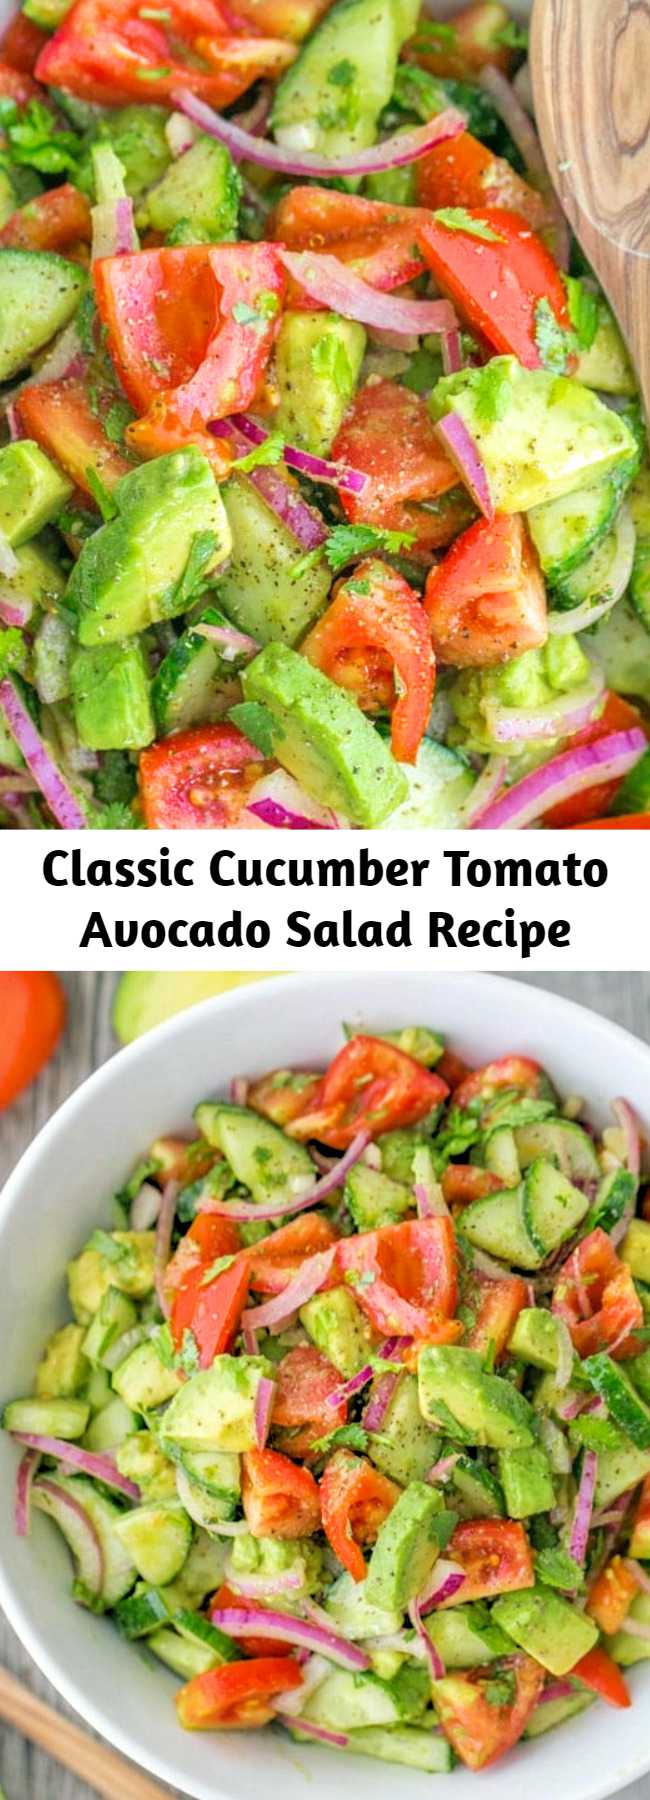 Classic Cucumber Tomato Avocado Salad Recipe - Our favorite classic cucumber and tomato salad just got better with the addition of avocado, a light and flavorful lemon dressing and the freshness of cilantro. Easy, excellent avocado salad.